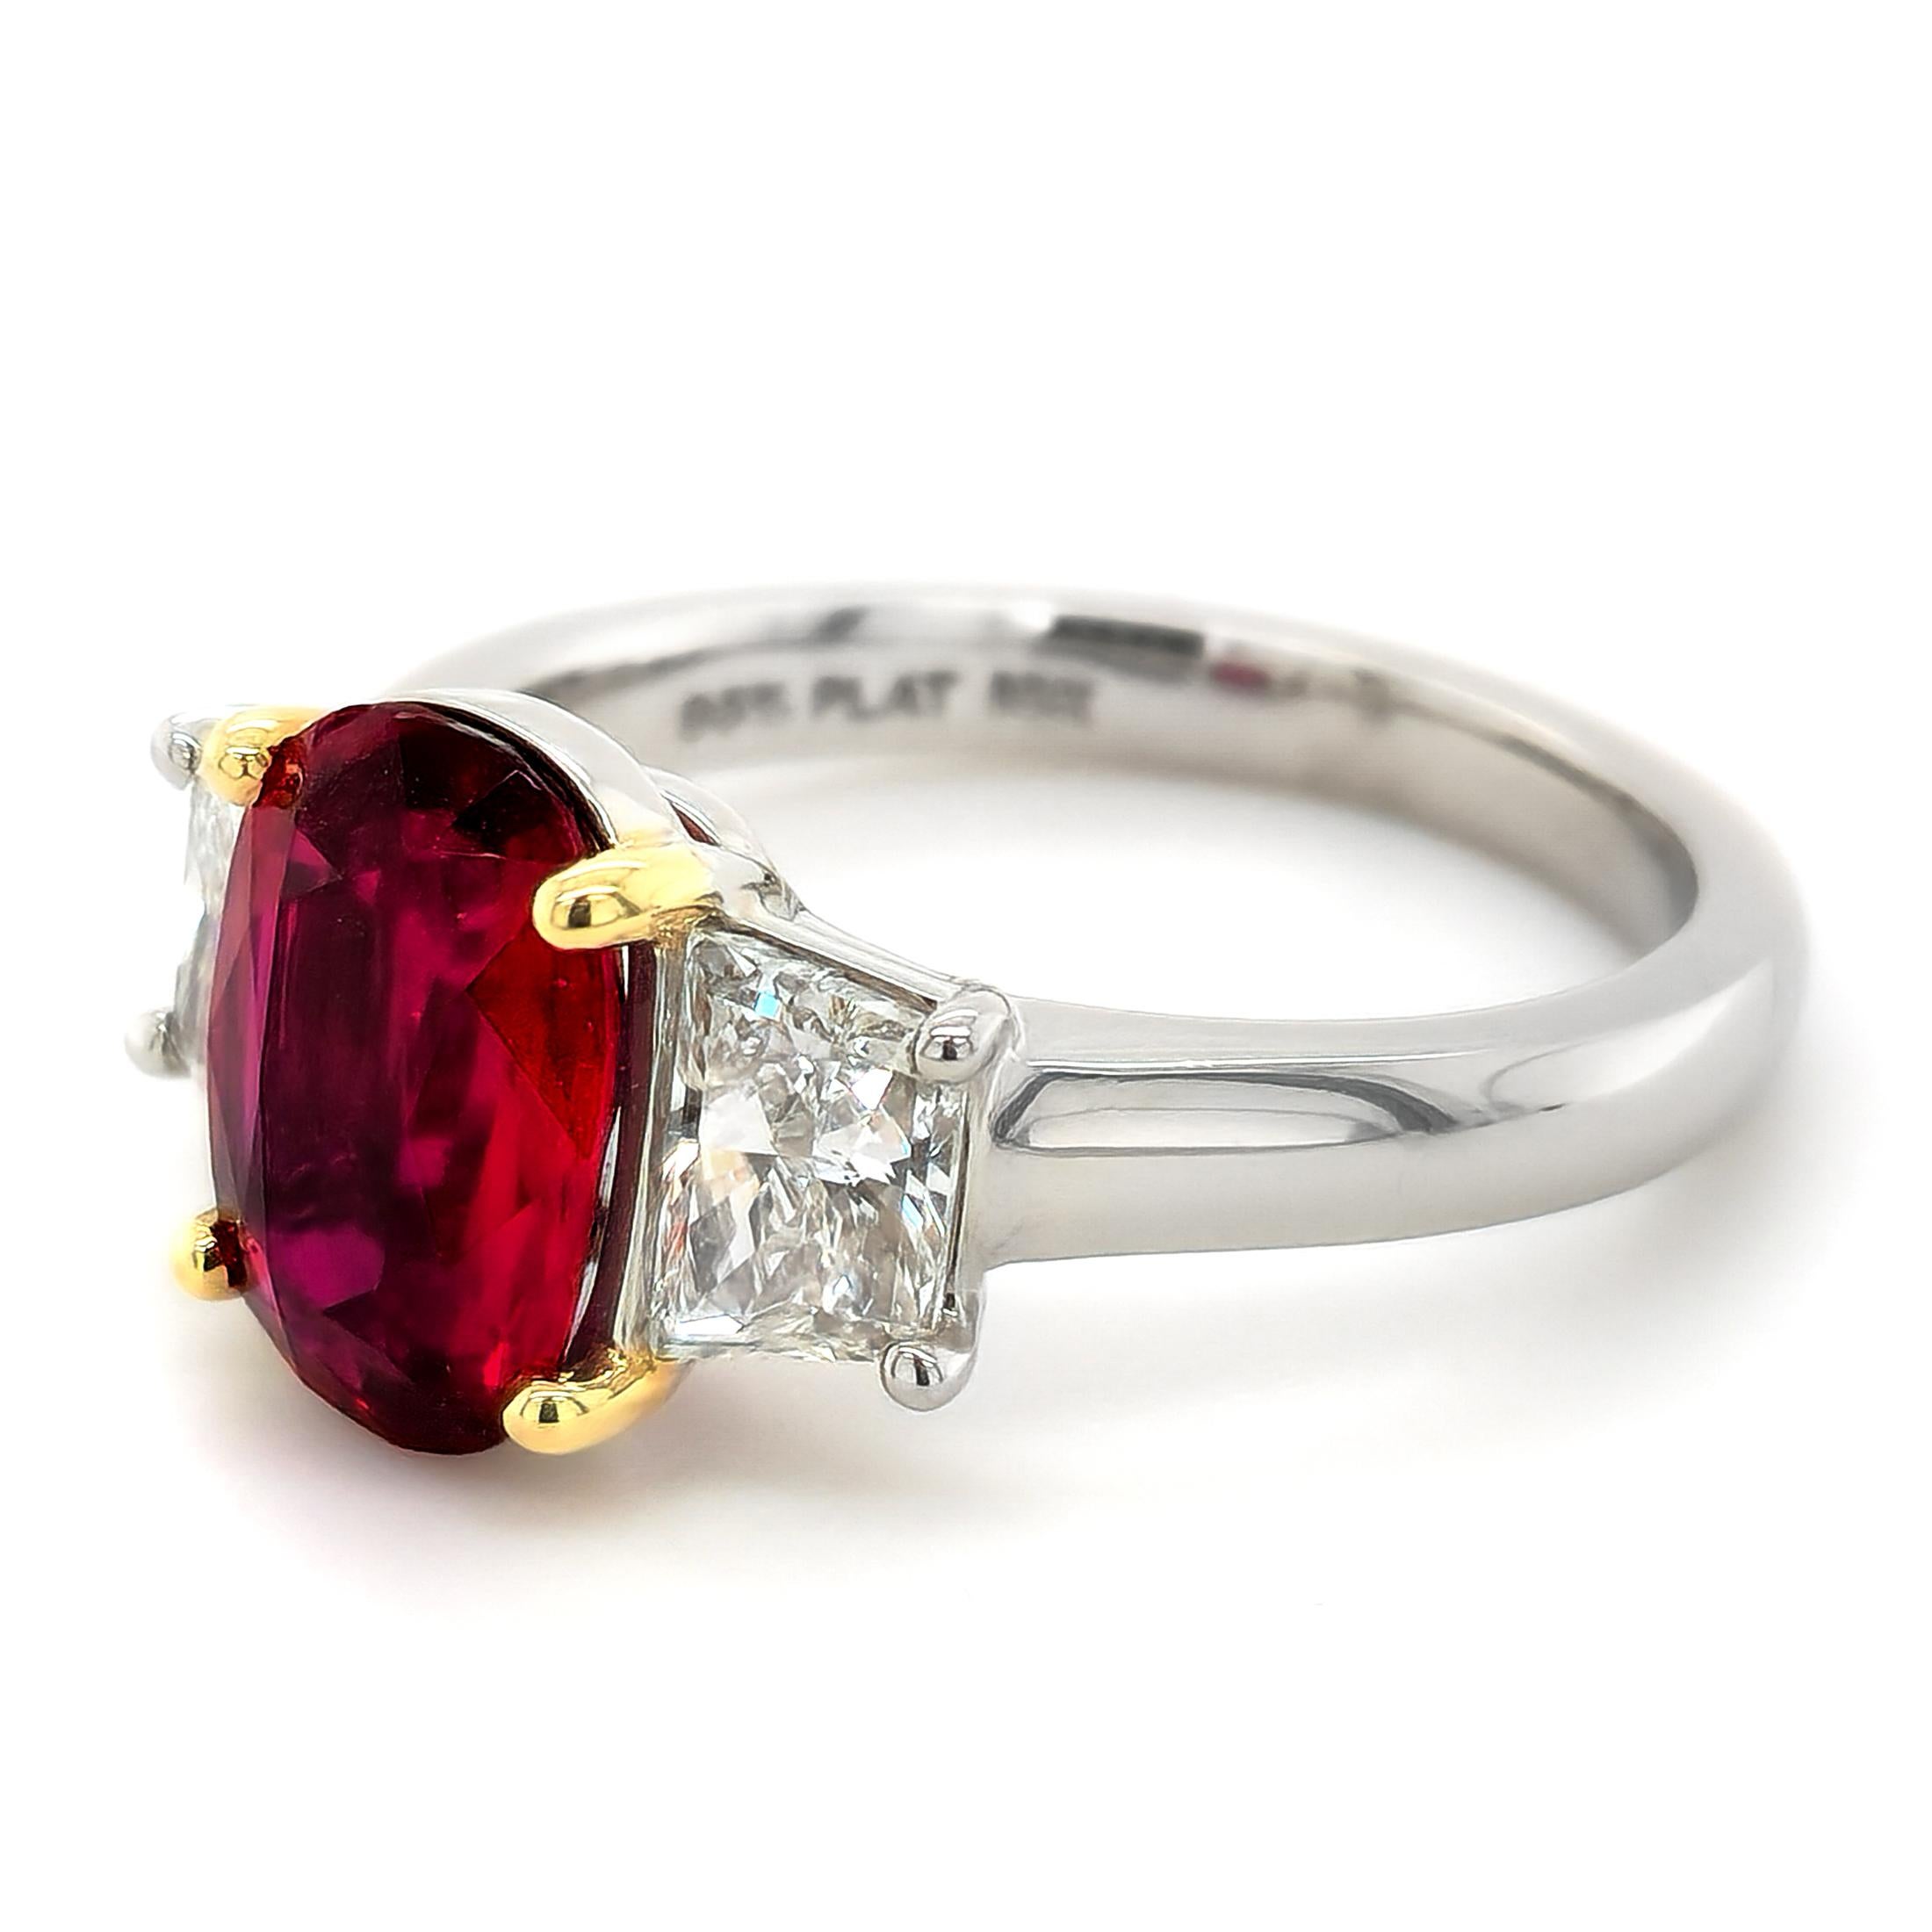 Brilliant Cut GIA and GRS Certified 2.51 Carat Unheated Ruby Diamond Platinum Engagement Ring For Sale